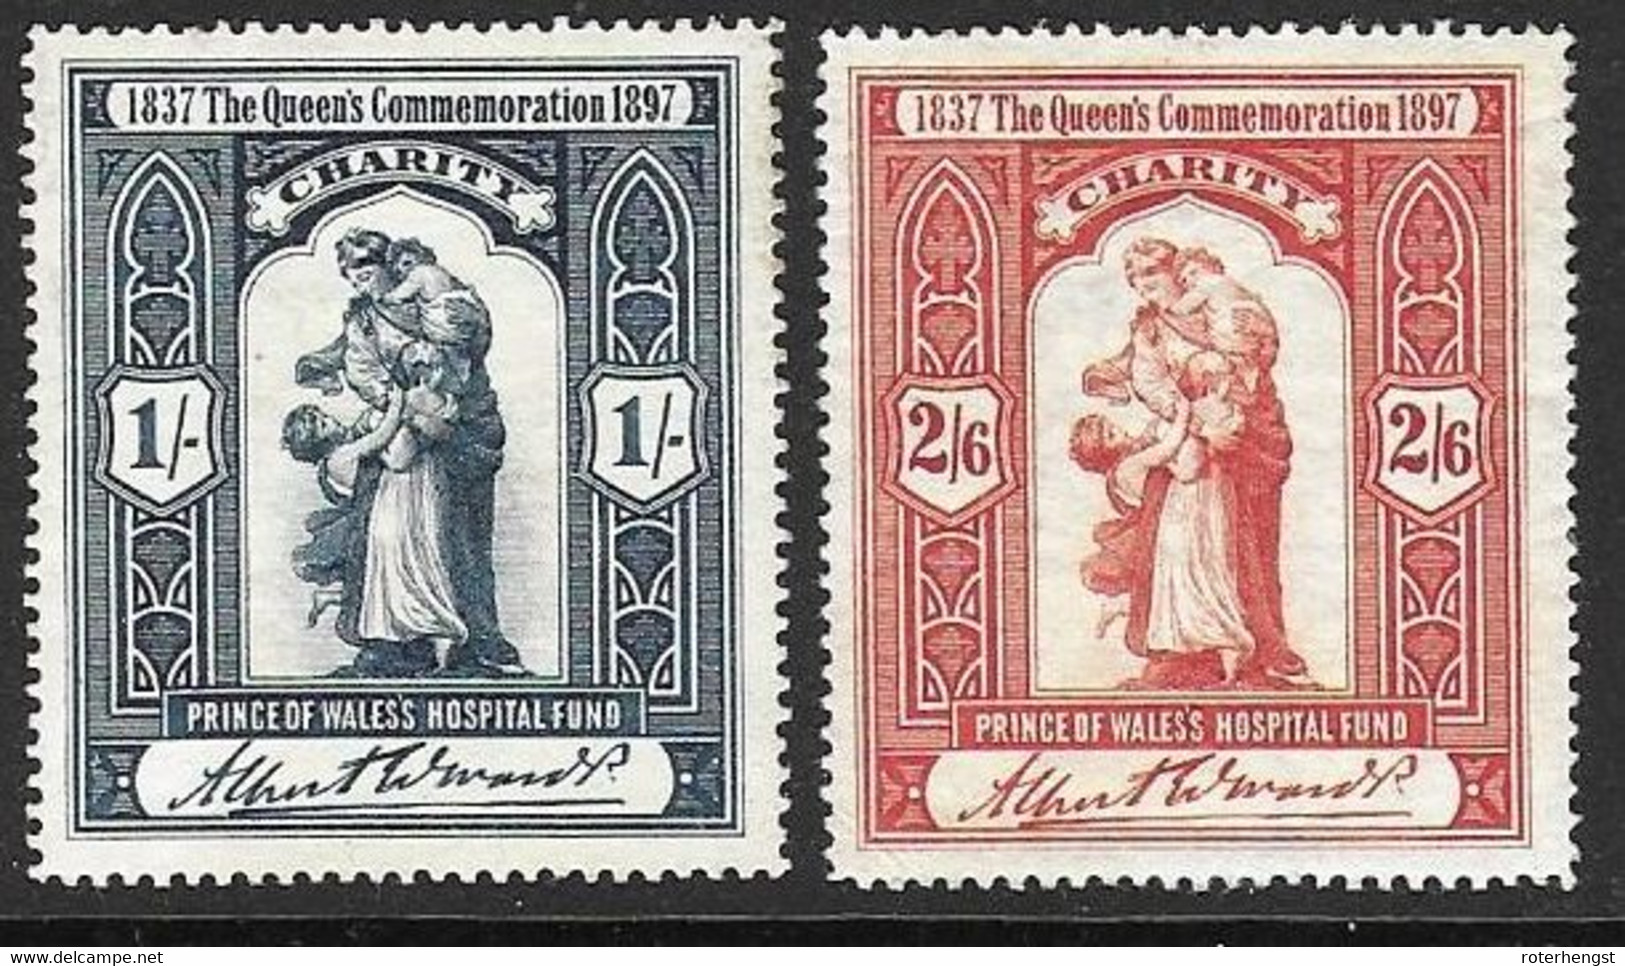 Queens Commemoration 1897 Mh * Charity Stamps - Neufs